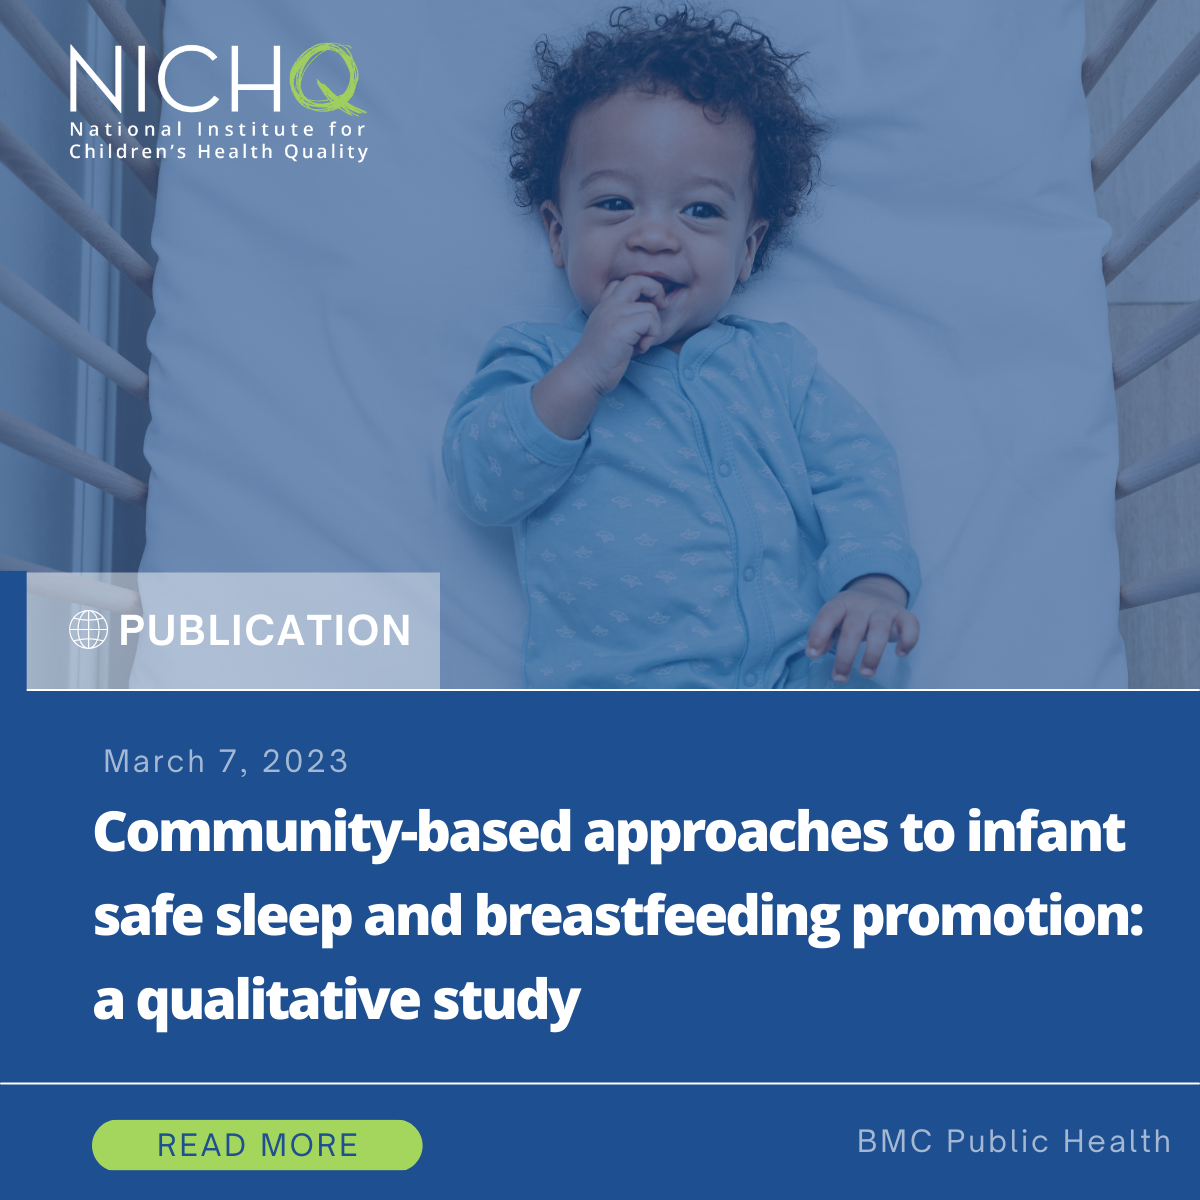 Community-based approaches to infant safe sleep and breastfeeding promotion: a qualitative study